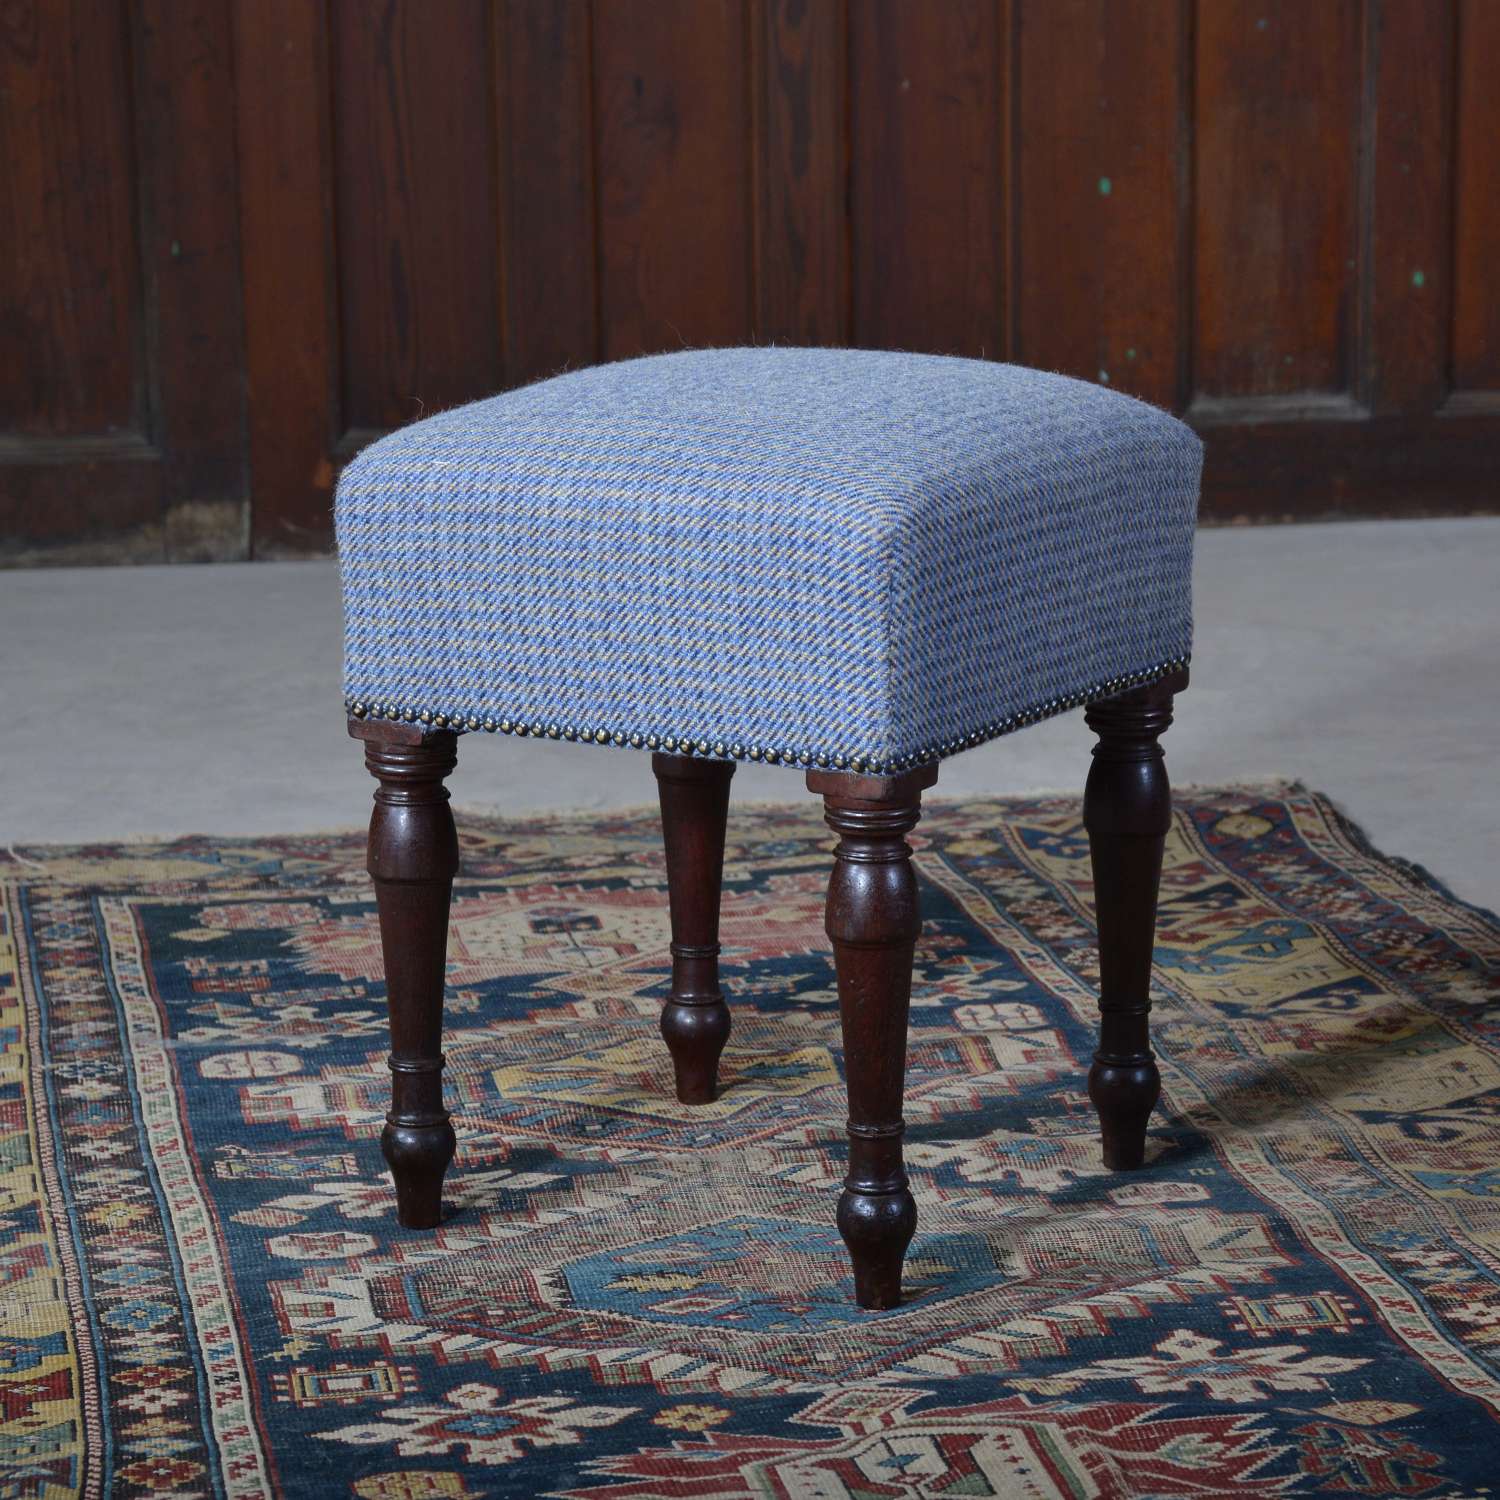 Small square footstool